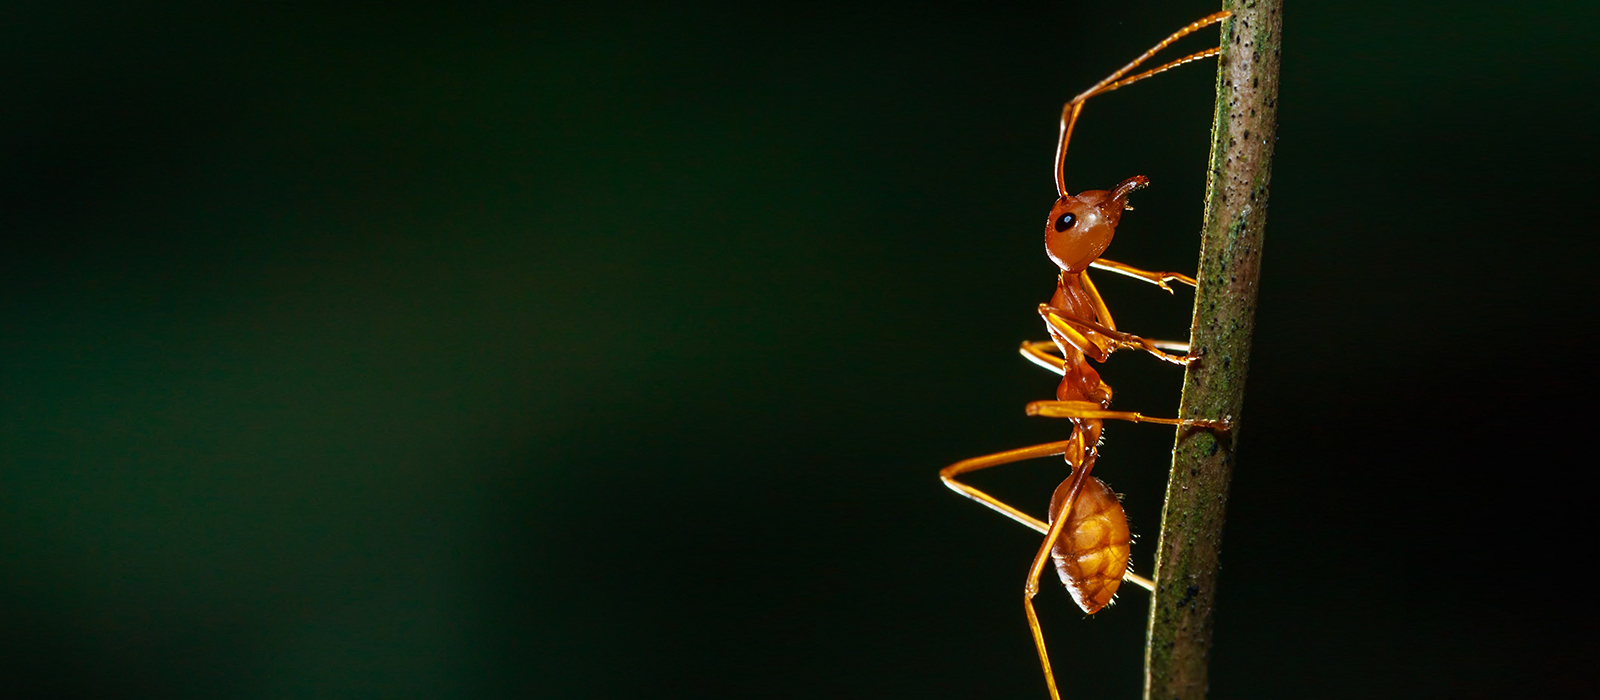 Macro image of an ant on a stalk